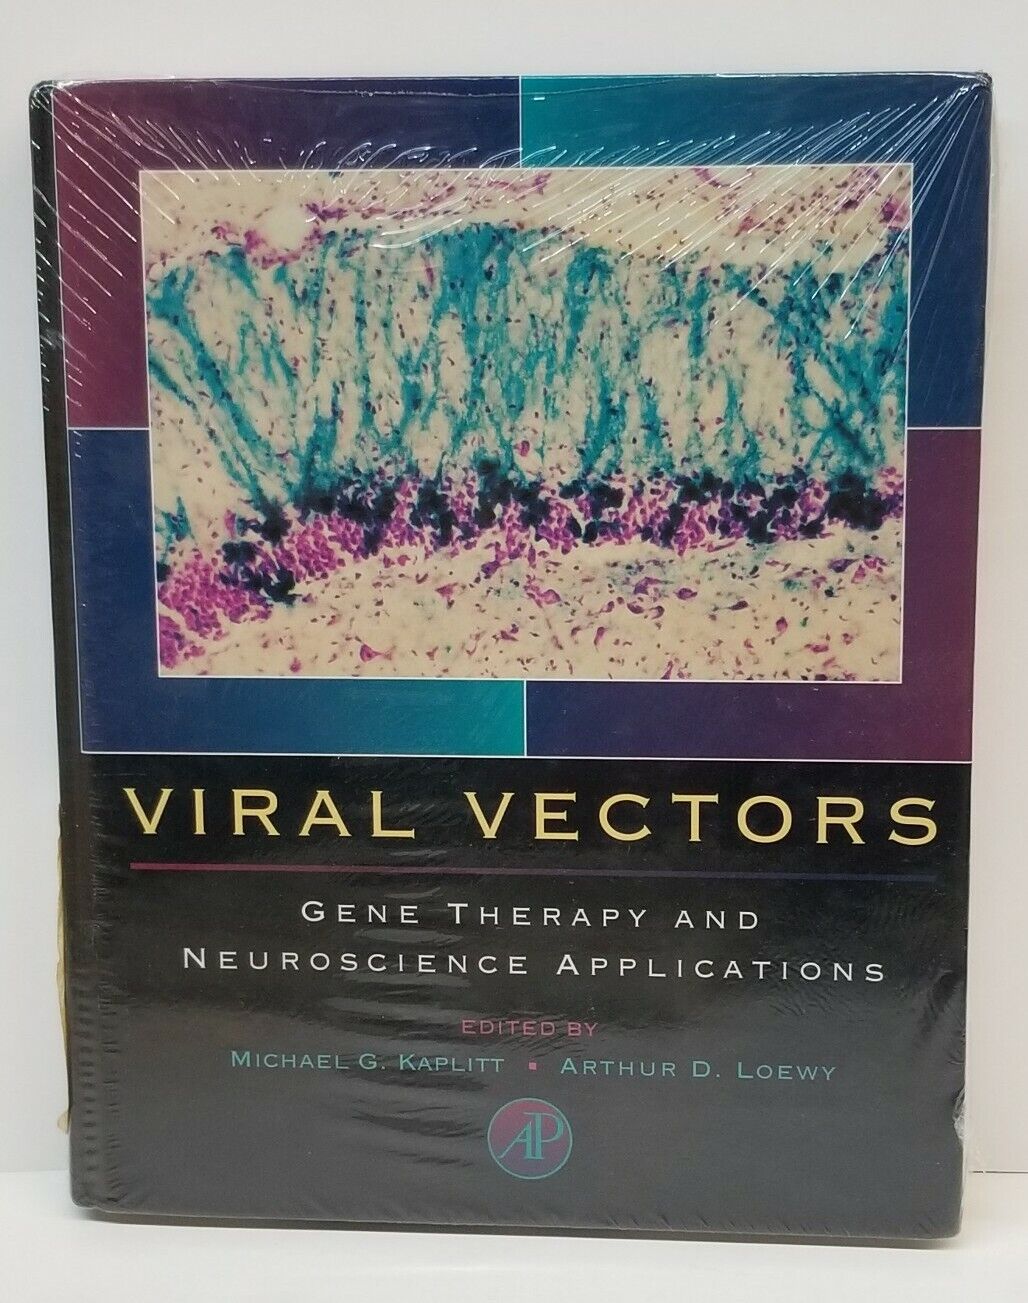 Viral Vectors: Gene Therapy and Neuroscience Applications by Loewy; Kaplitt VGC